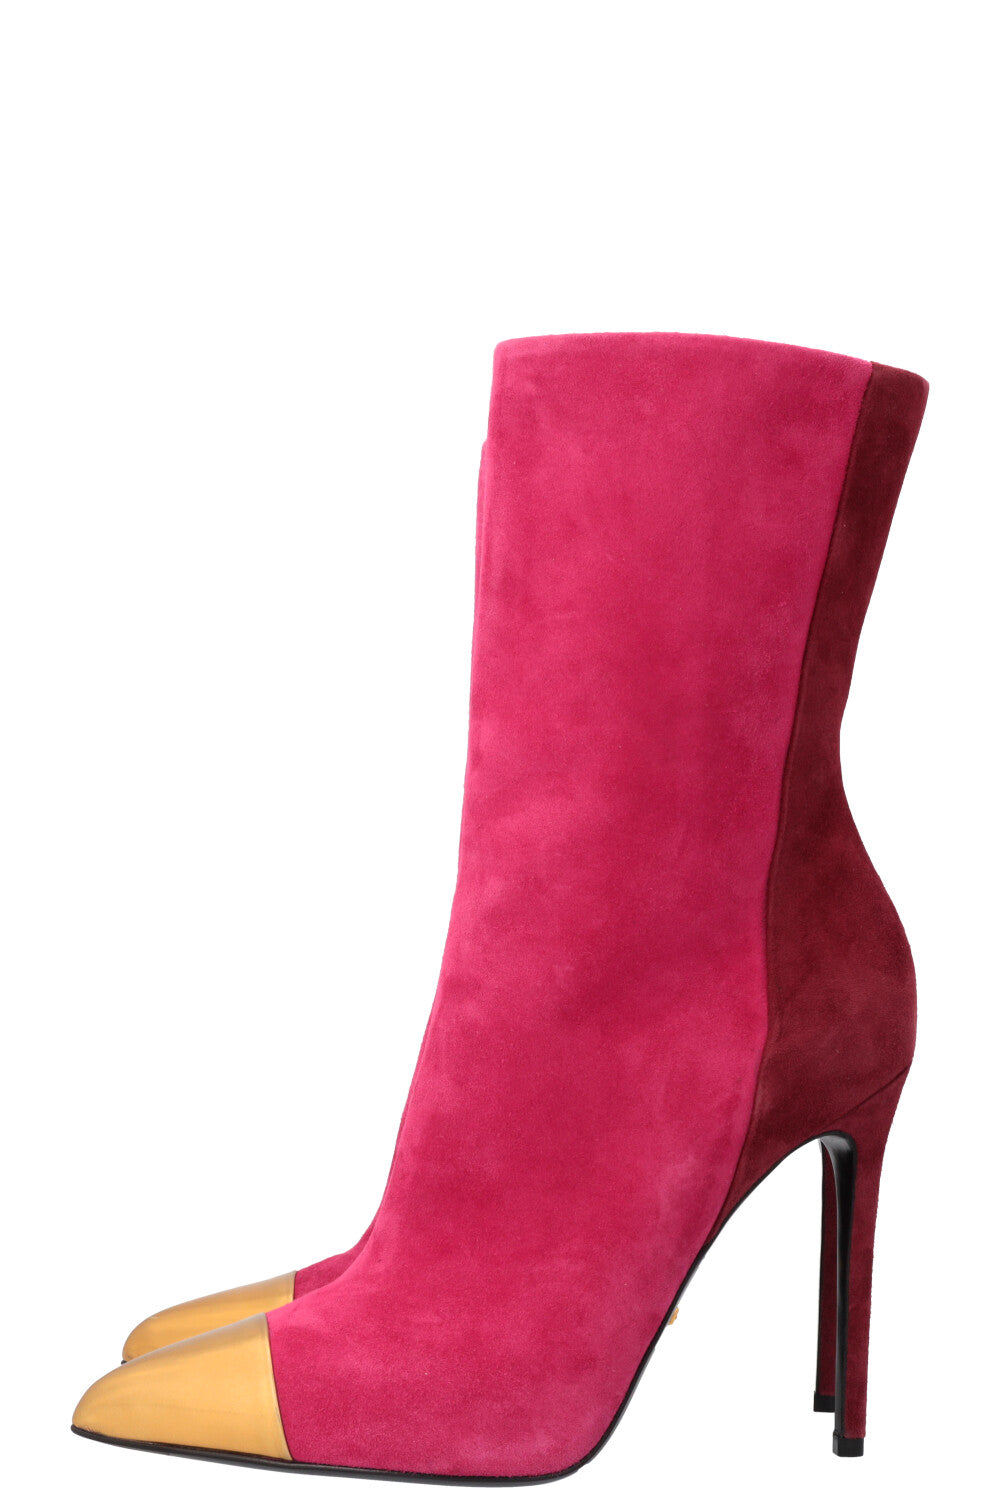 GUCCI Boot Suede Pink